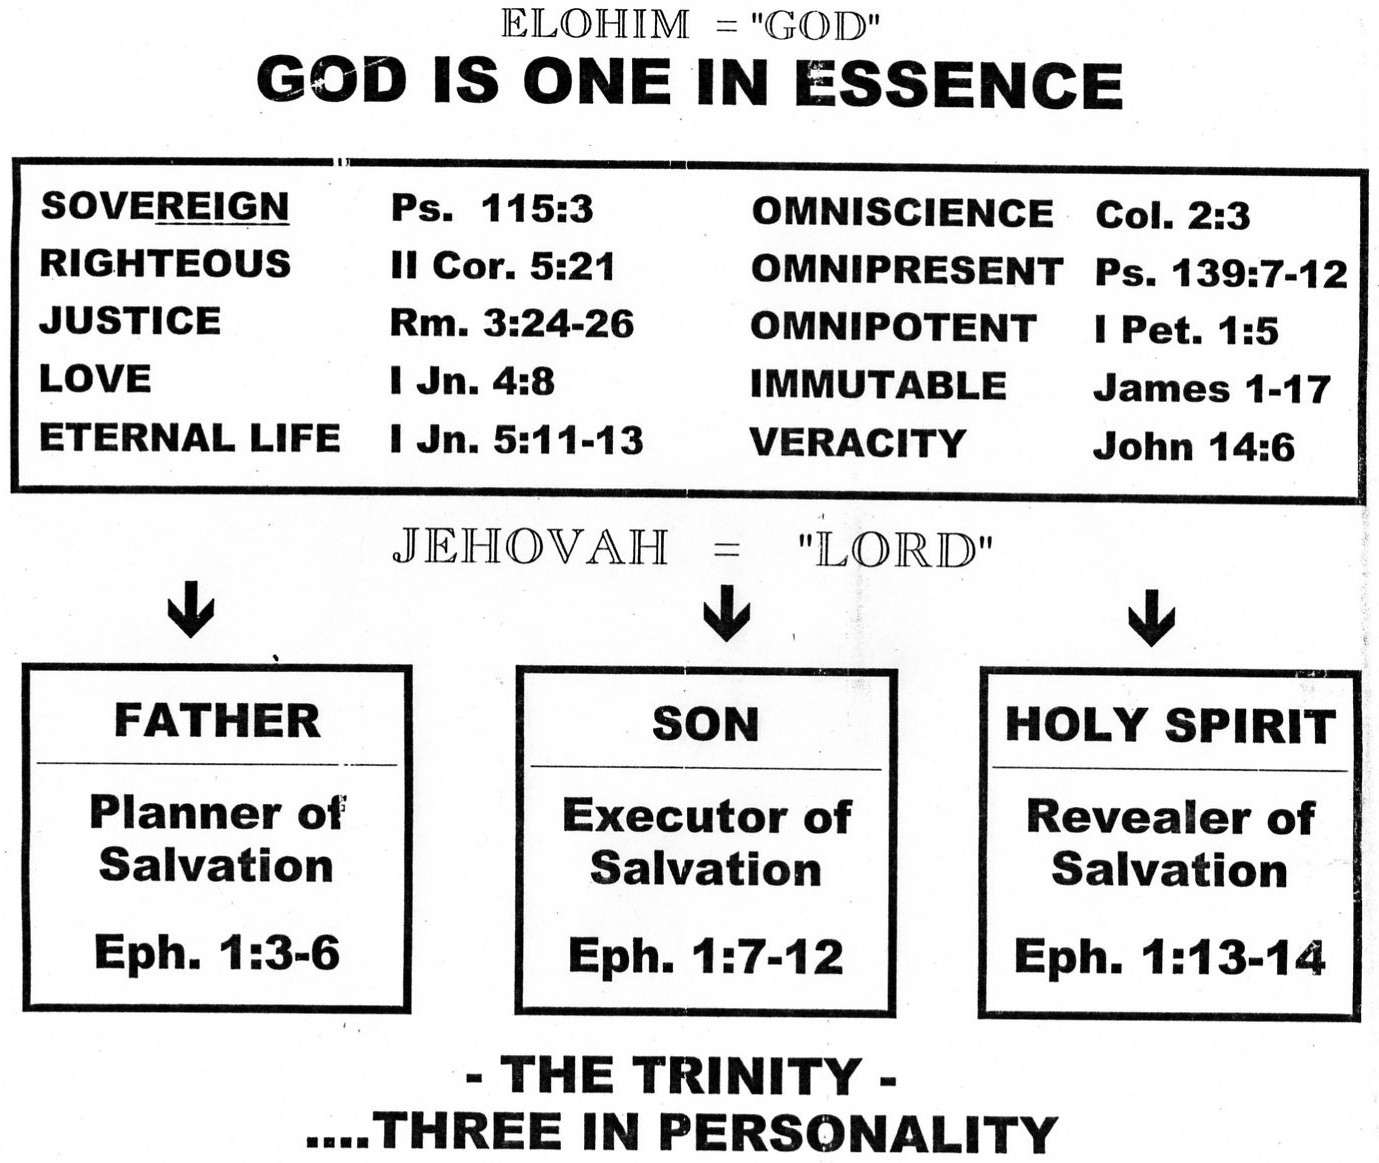 God is One in Essence